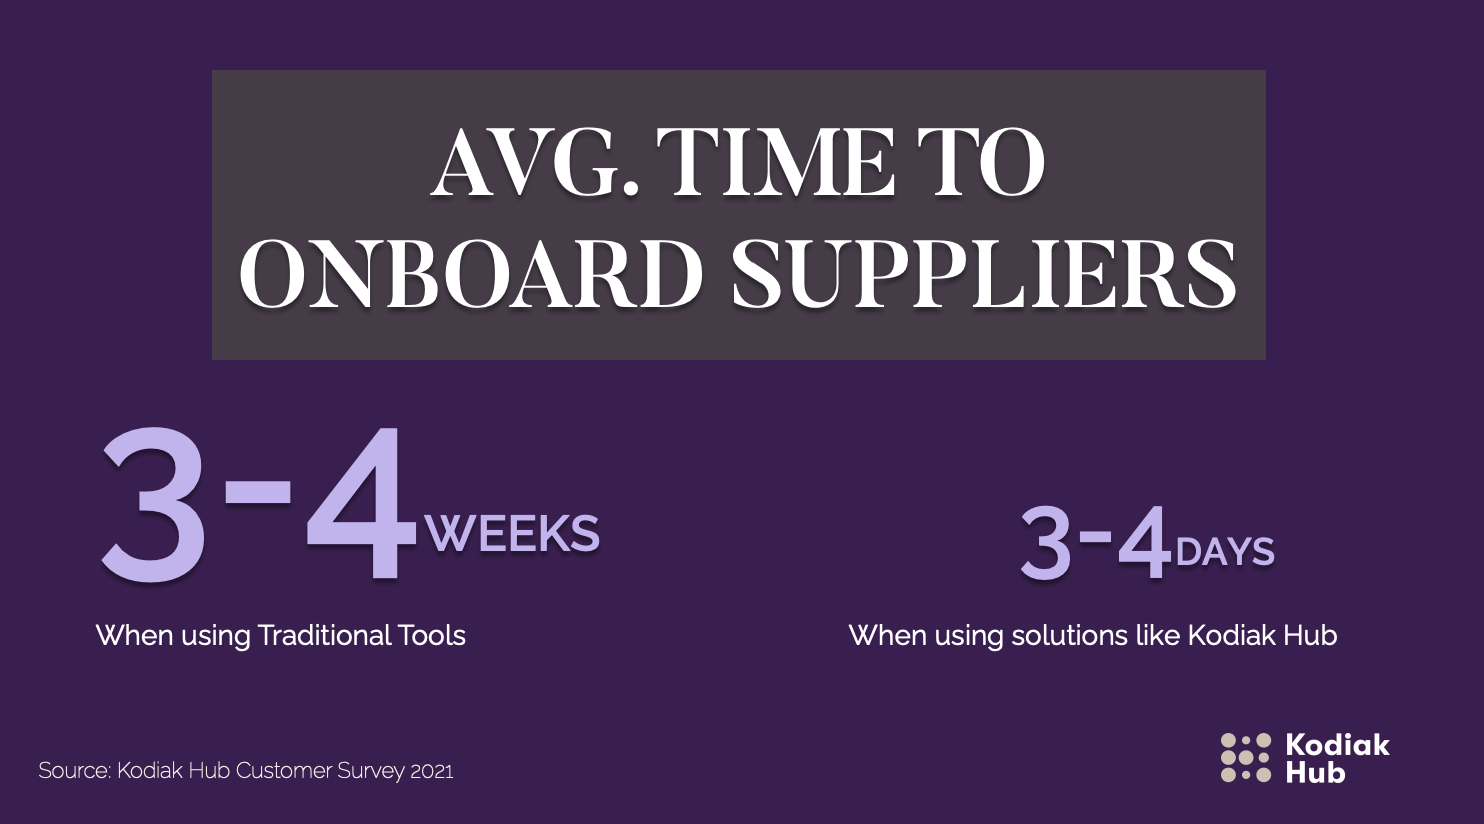 Average time to onboard suppliers